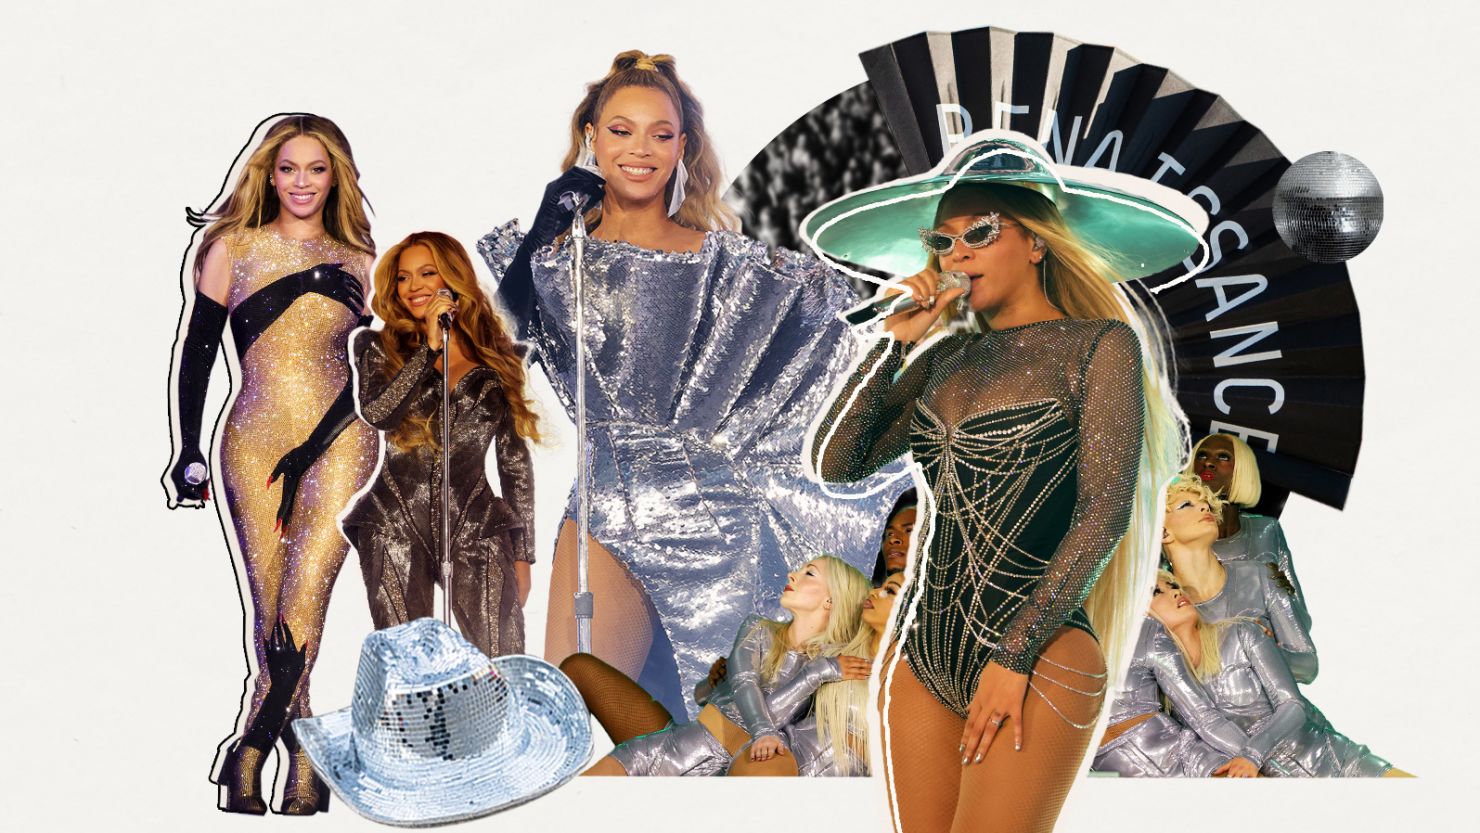 As Beyoncé's Renaissance World Tour ends, CNN looks back at some of her best performance looks.